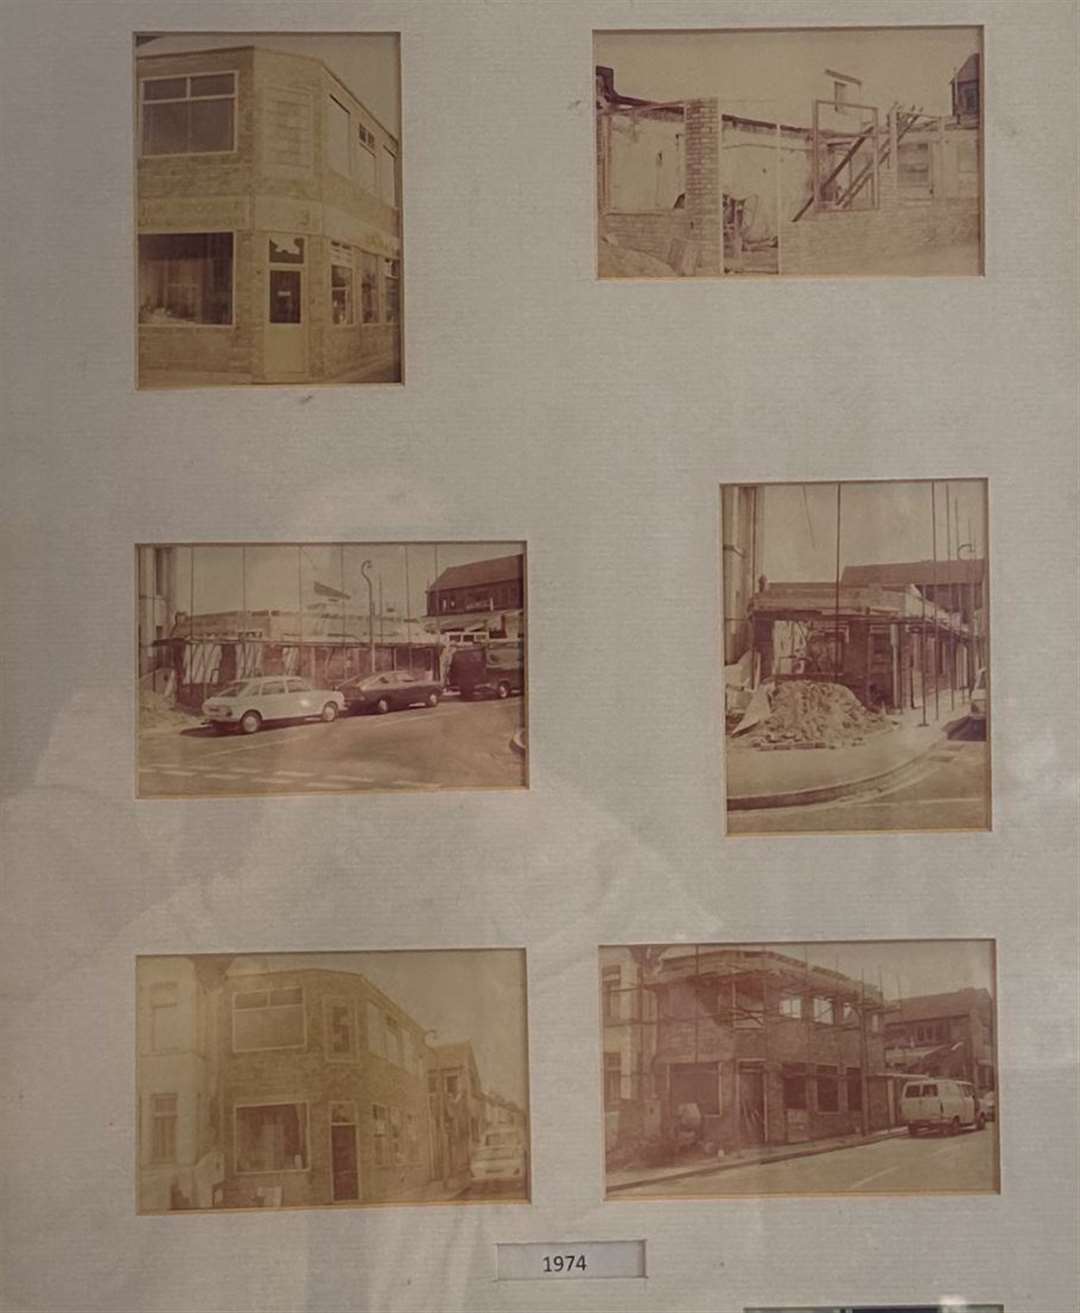 Photos show Spooner's Glass when it opened in 1960 up until 1989